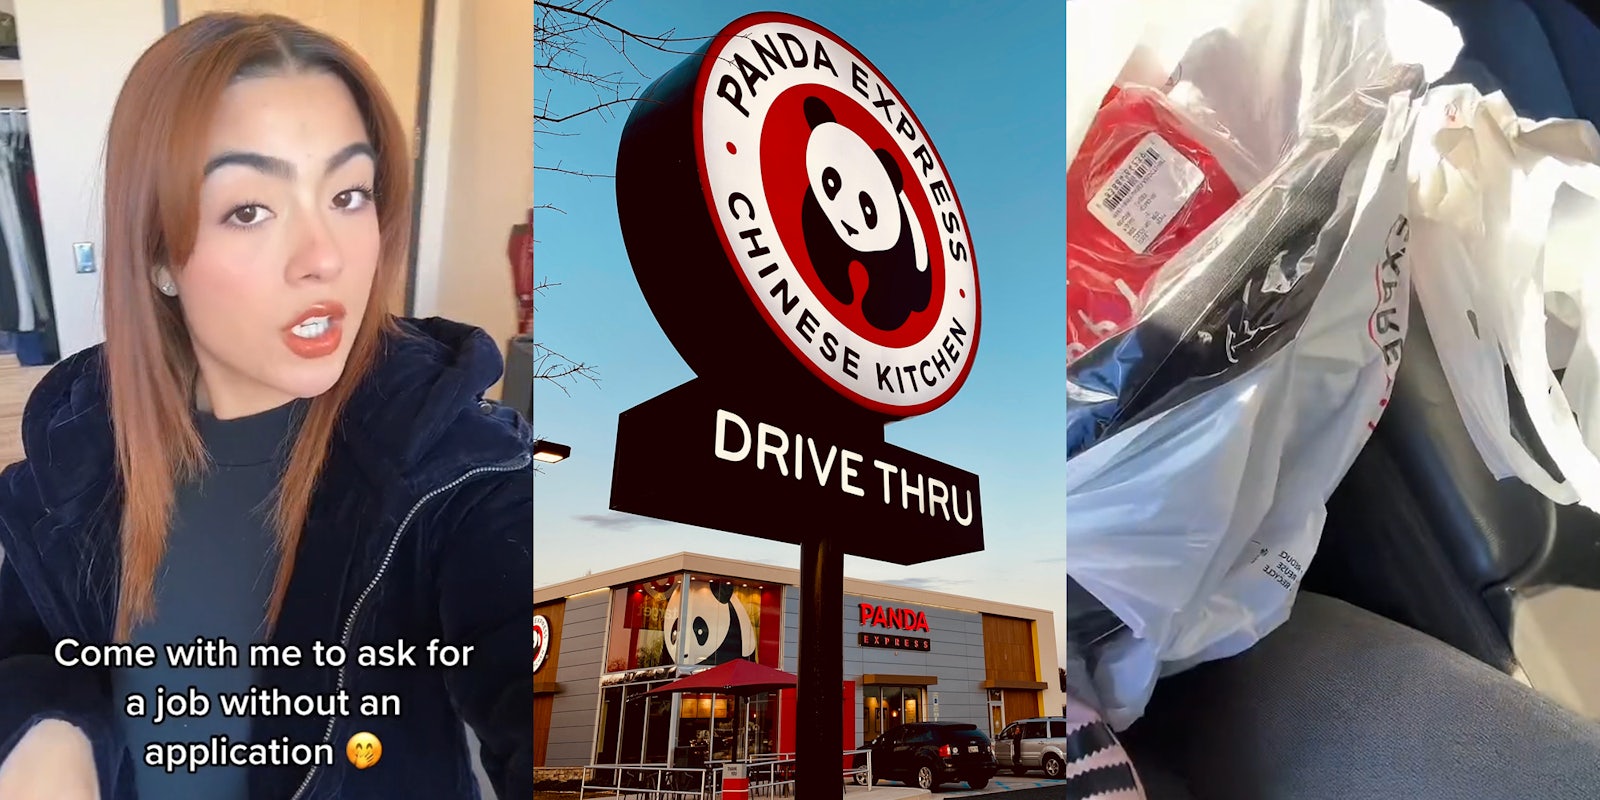 woman speaking with caption 'Come with me to ask for a job without an application' (l) Panda Express sign with building behind (c) bag of Panda Express uniforms in car (r)